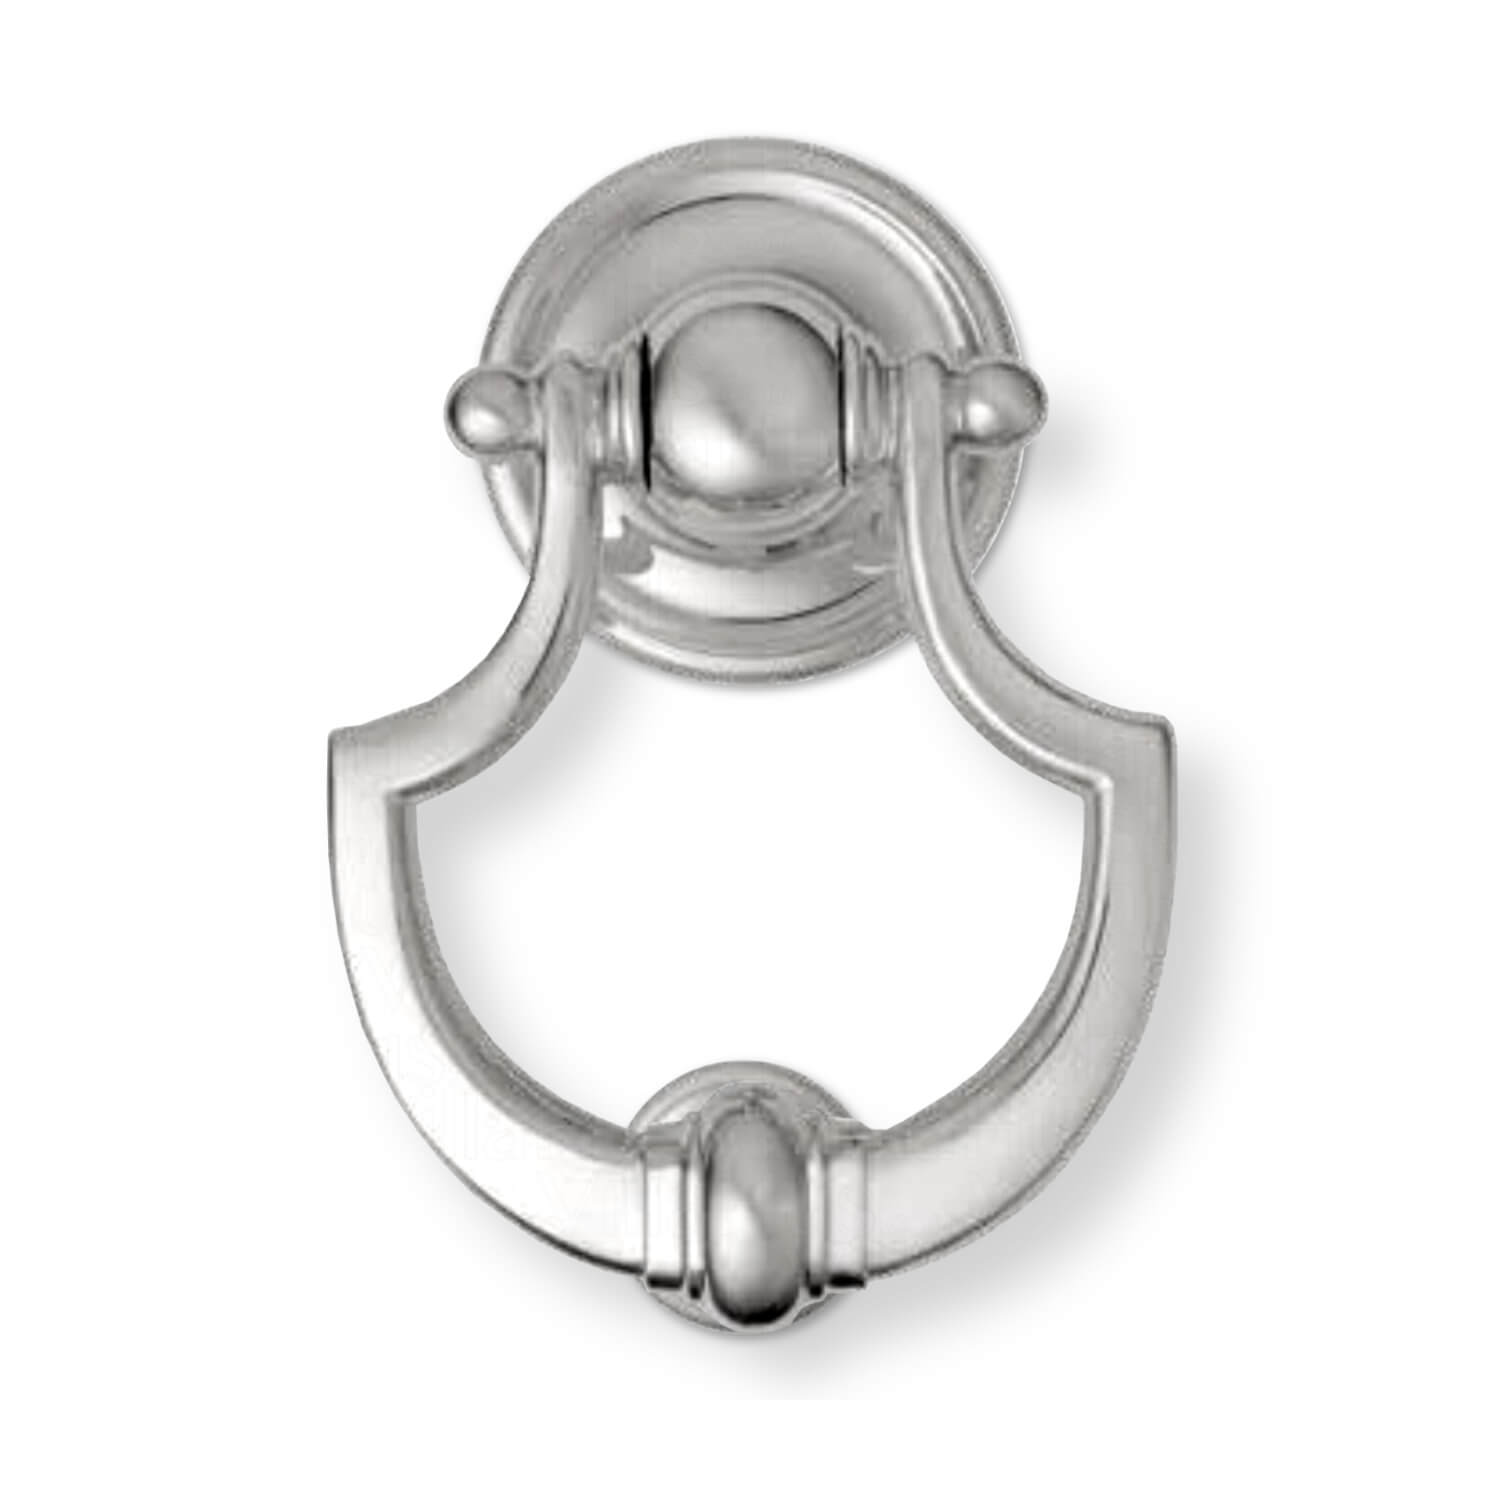 Trimco 620 Door Knocker With Viewer Satin Chrome Plated Over Nickel Finish 